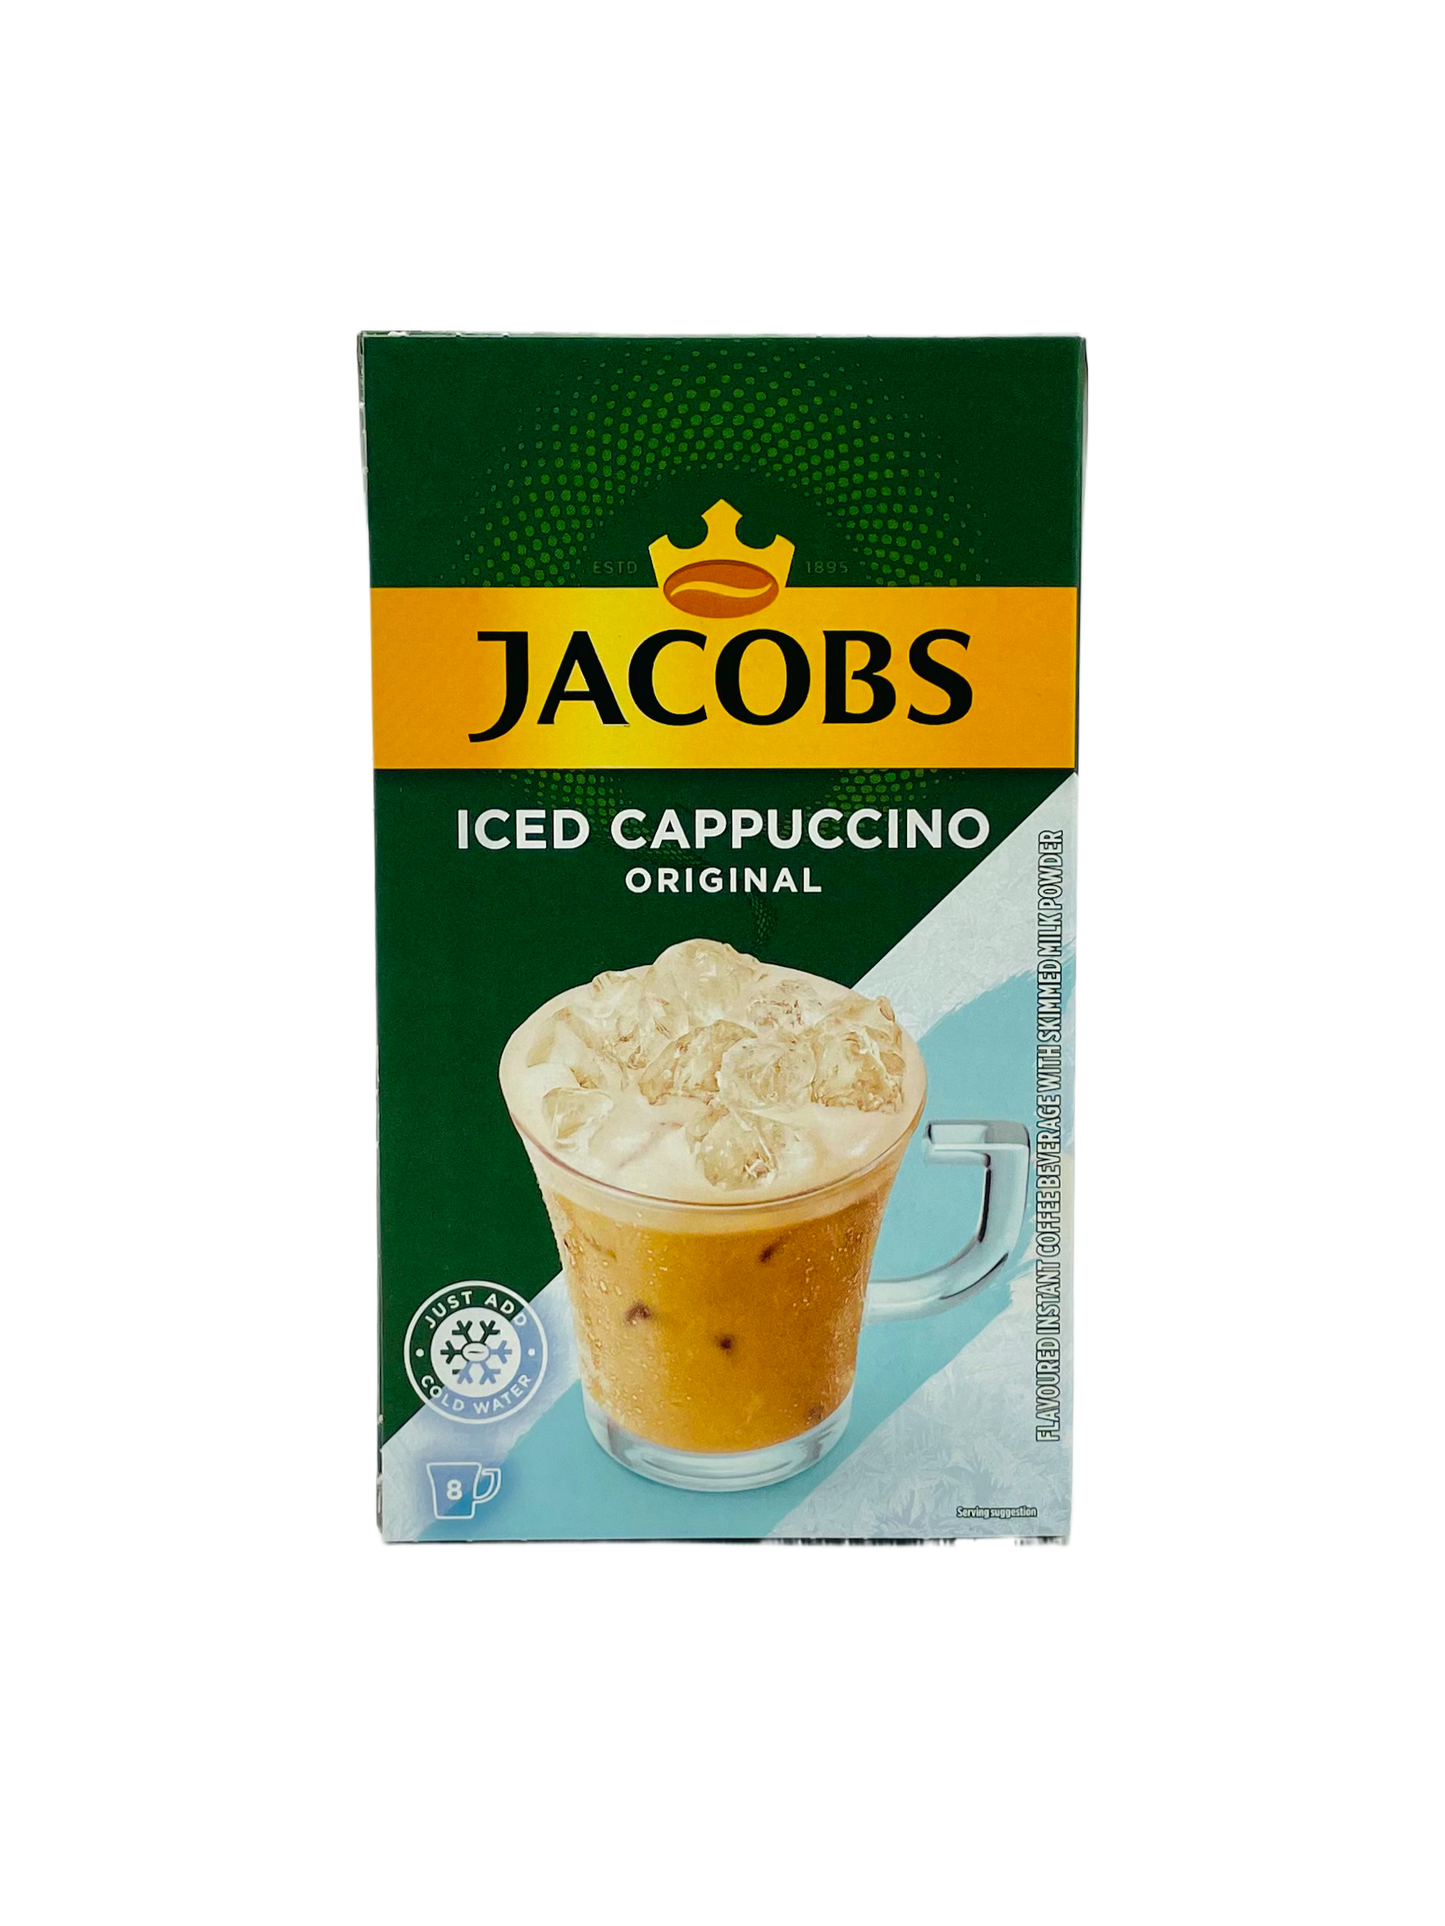 Jacobs Iced Cappuccino 8's